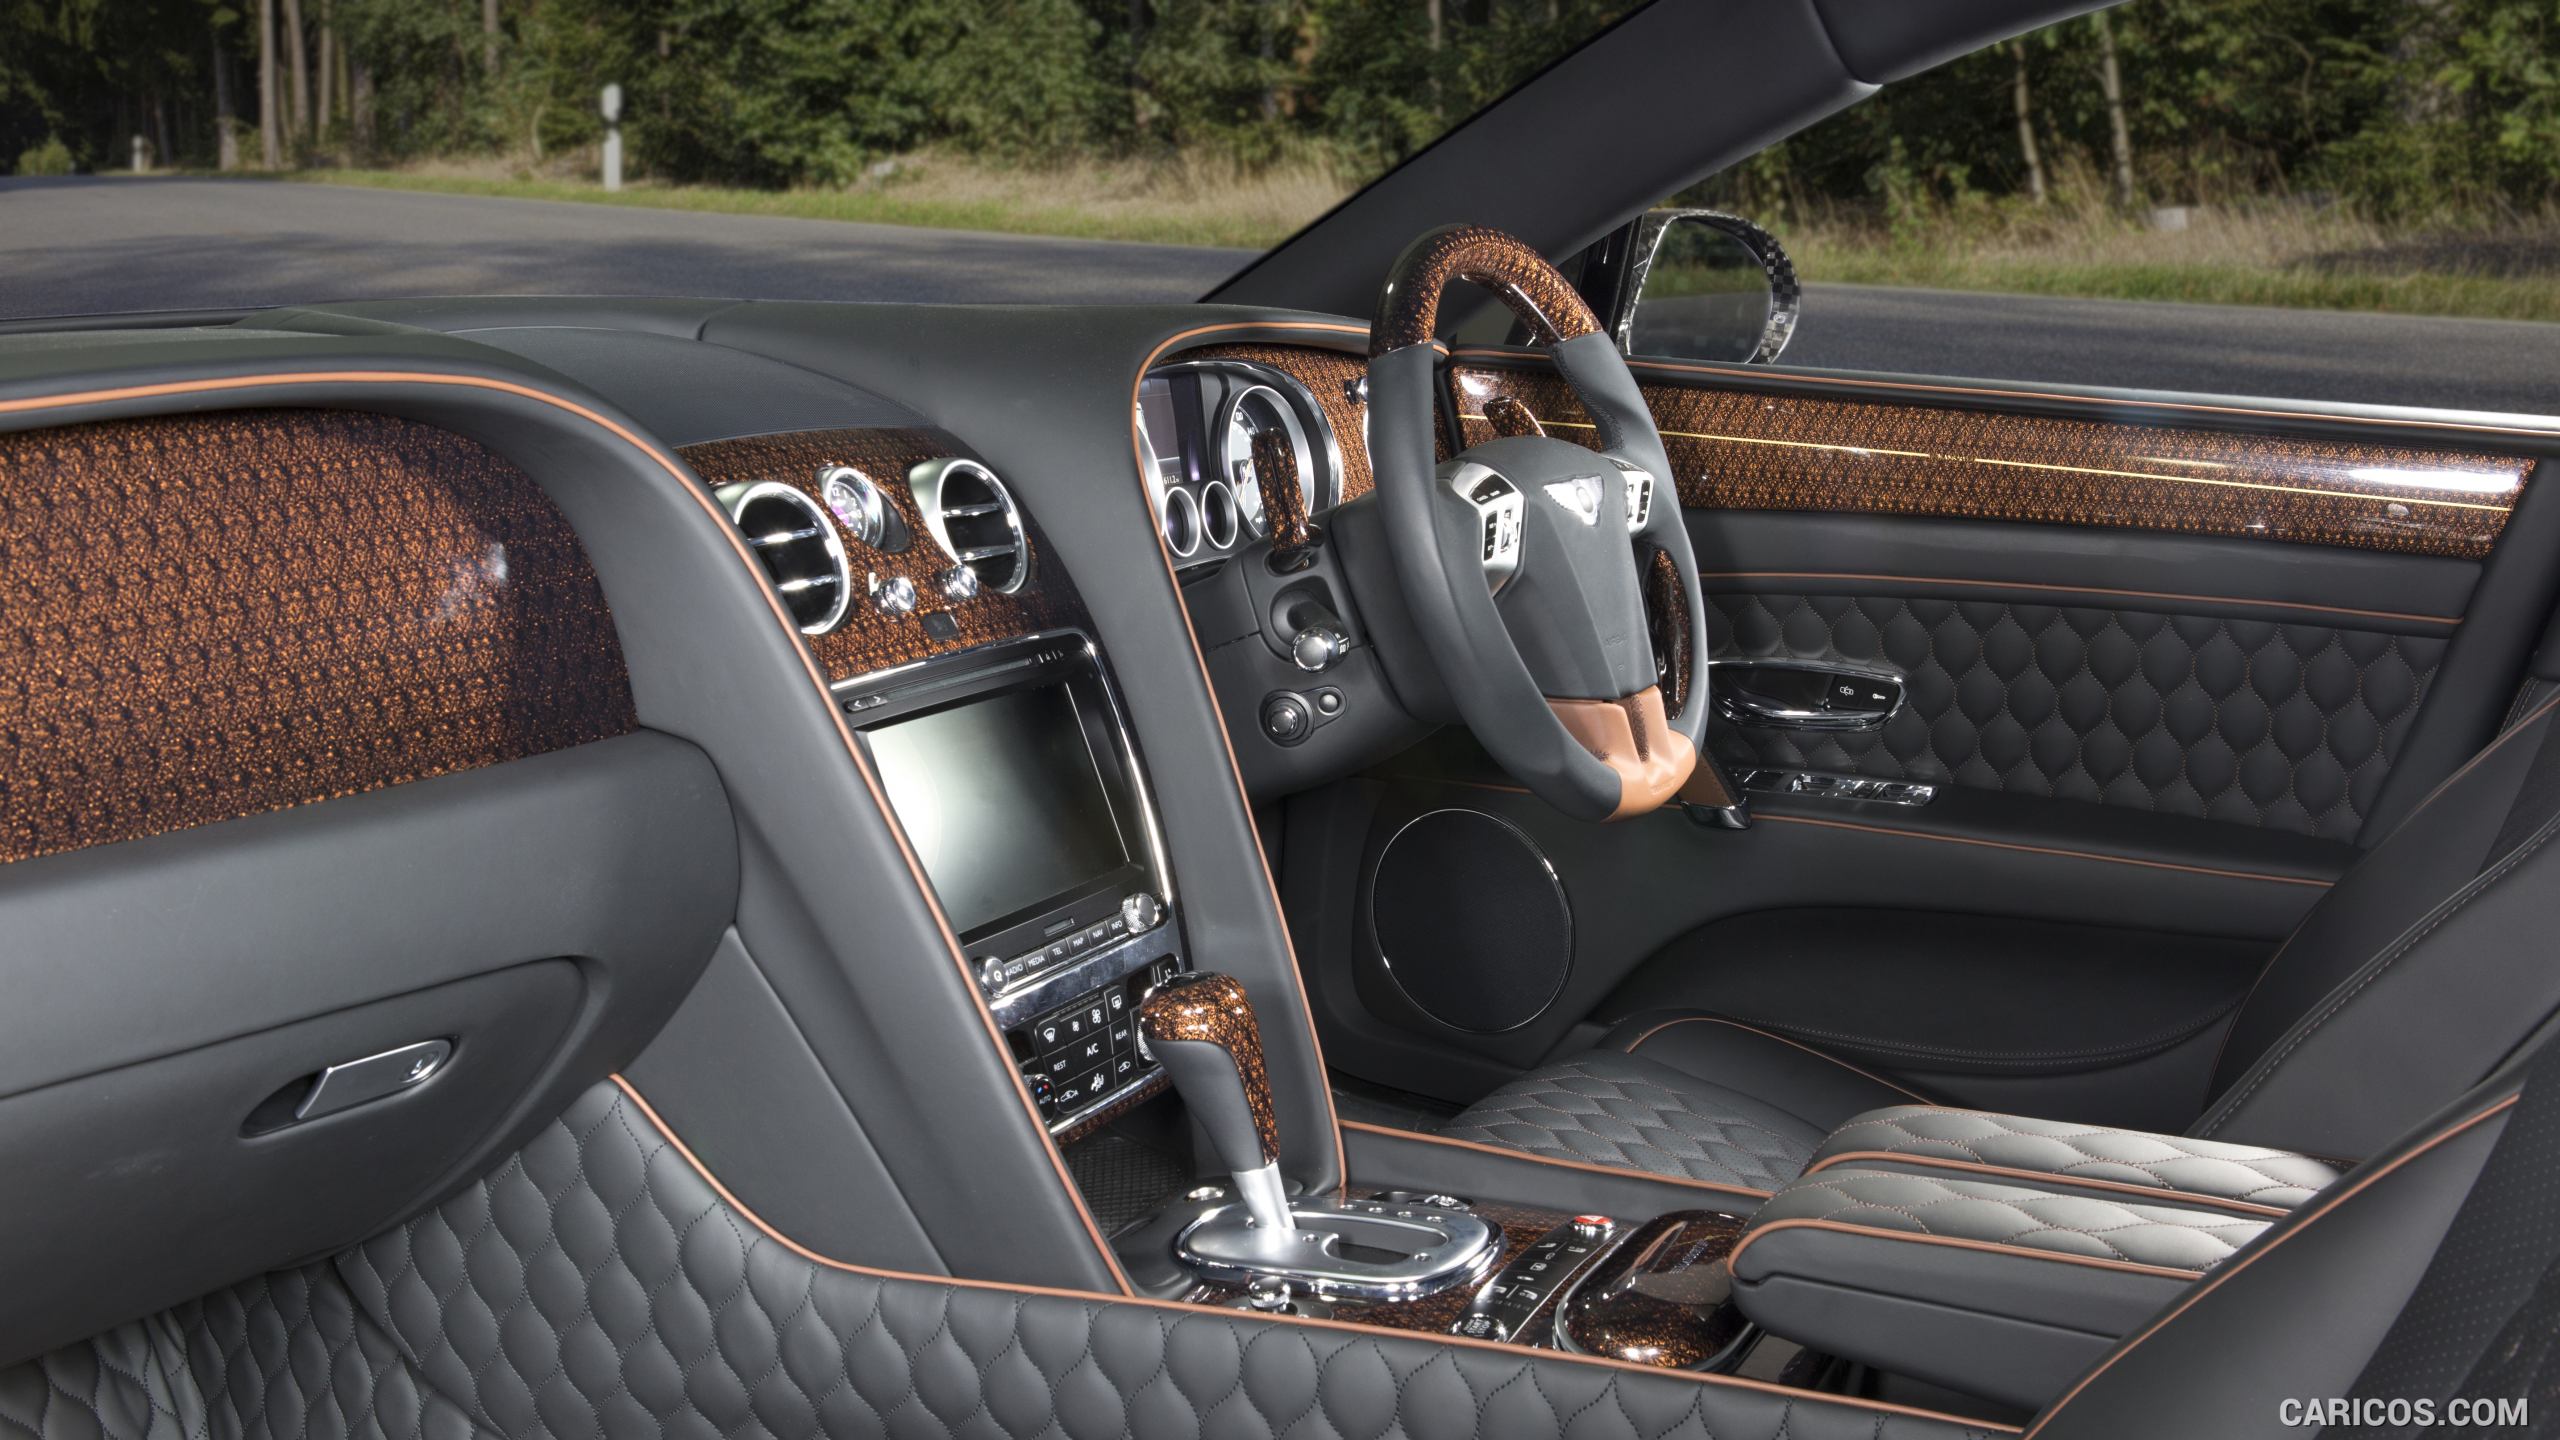 2015 MANSORY Bentley Flying Spur - Interior, #9 of 9